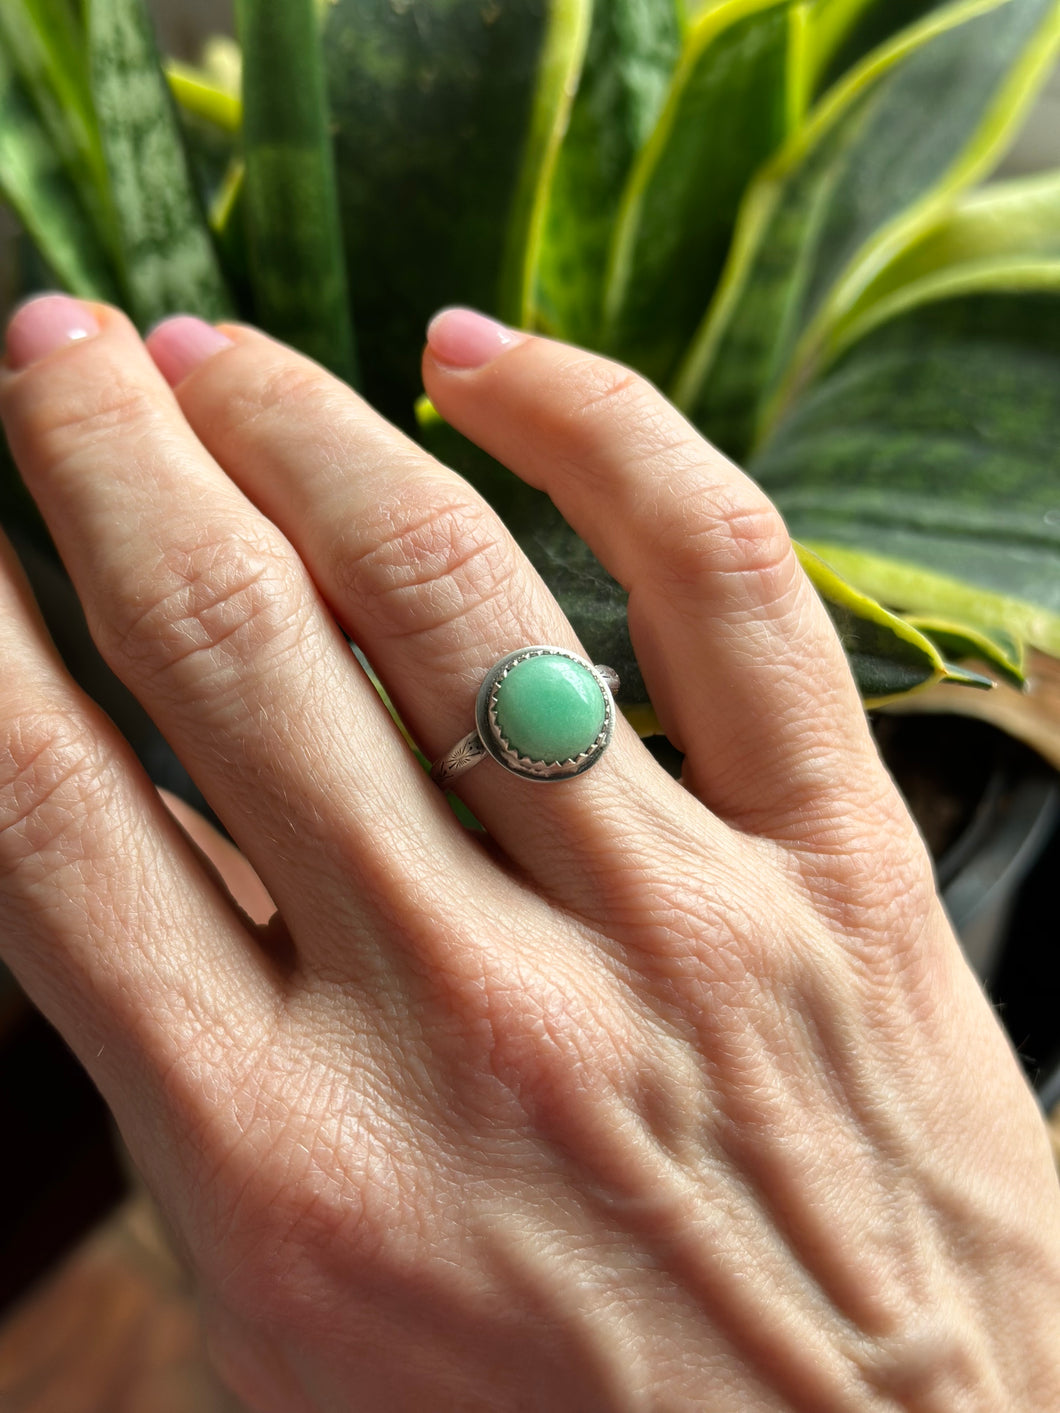 Natural Minty Green Chrysoprase Sterling Silver Ring, size 6.5